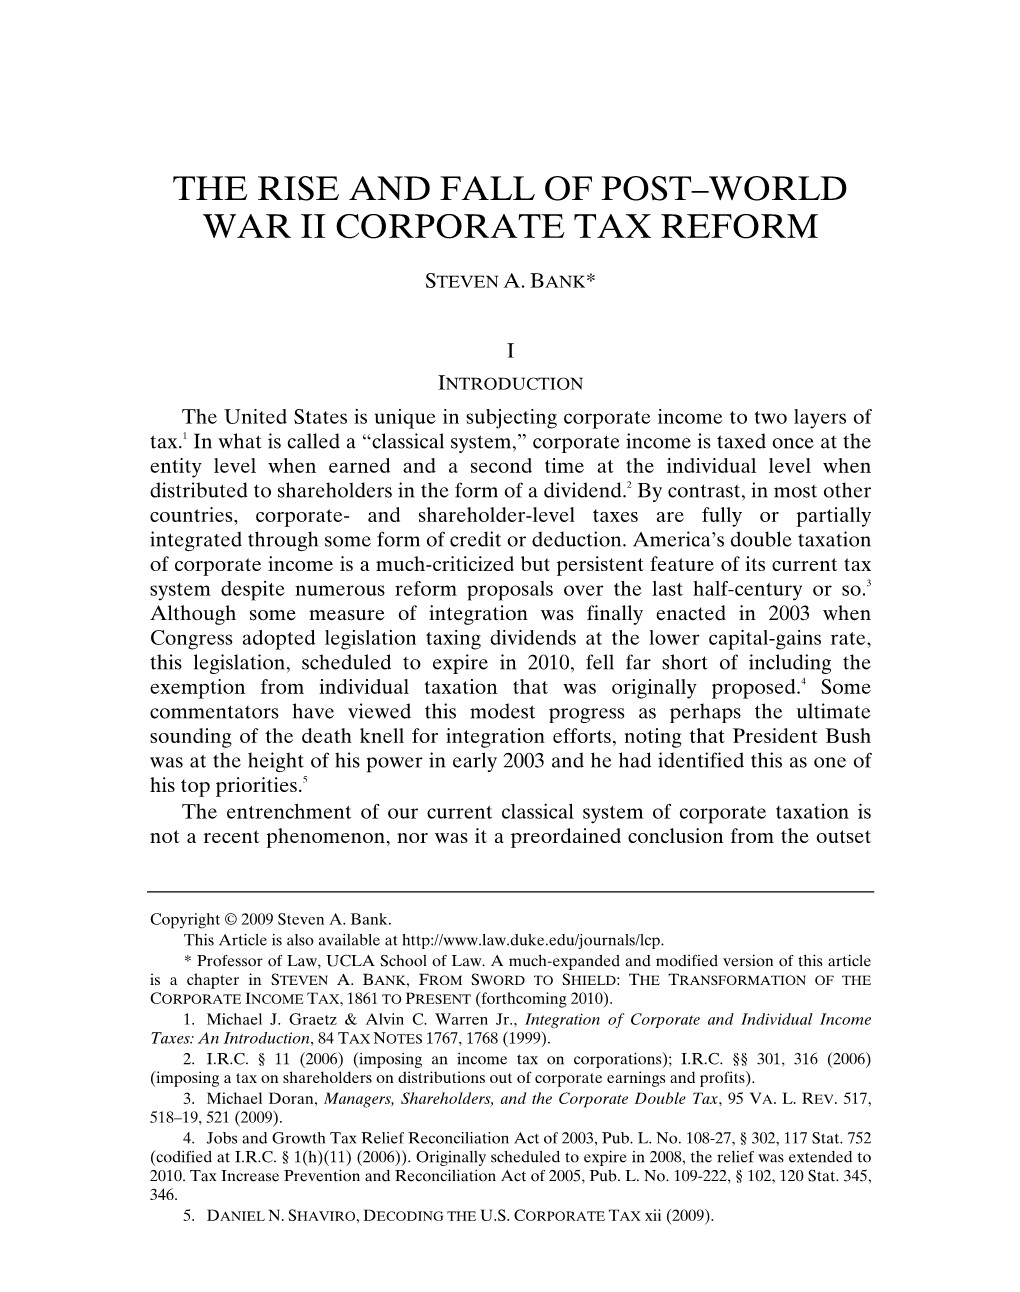 The Rise and Fall of Post—World War II Corporate Tax Reform